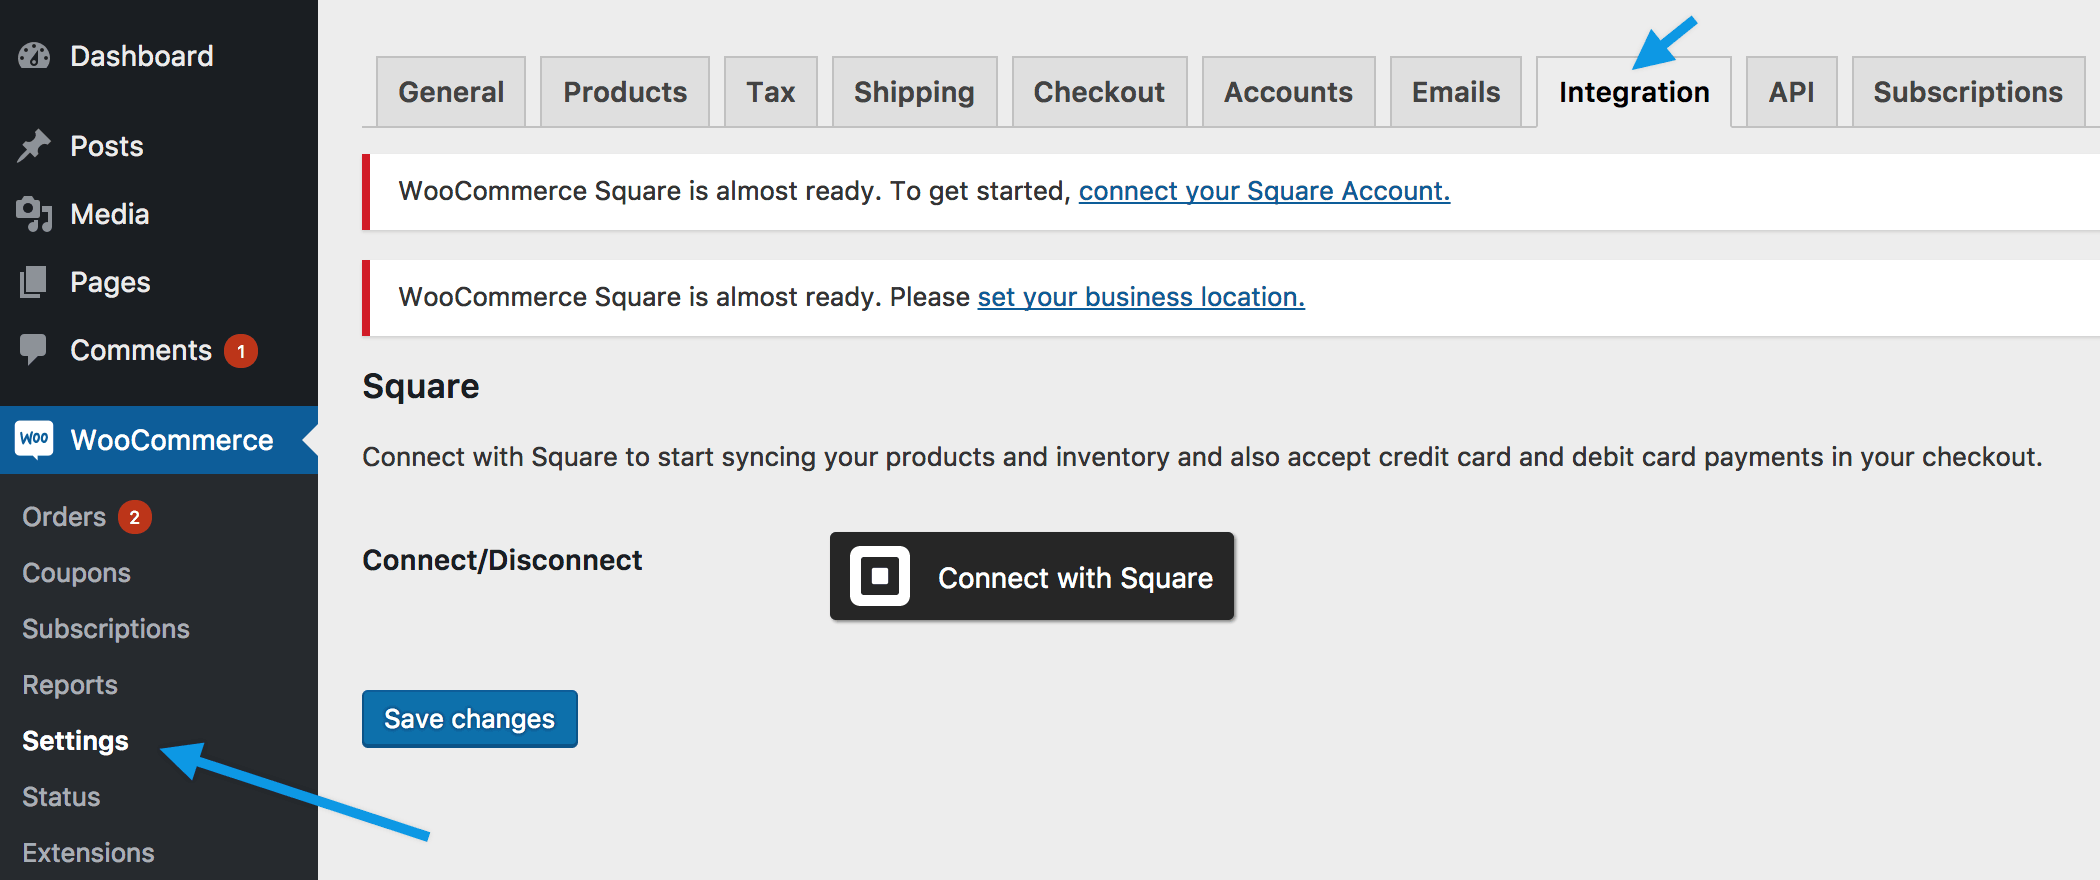 Once you’ve added the free extensions to your site, connect it to your Square account to sync data